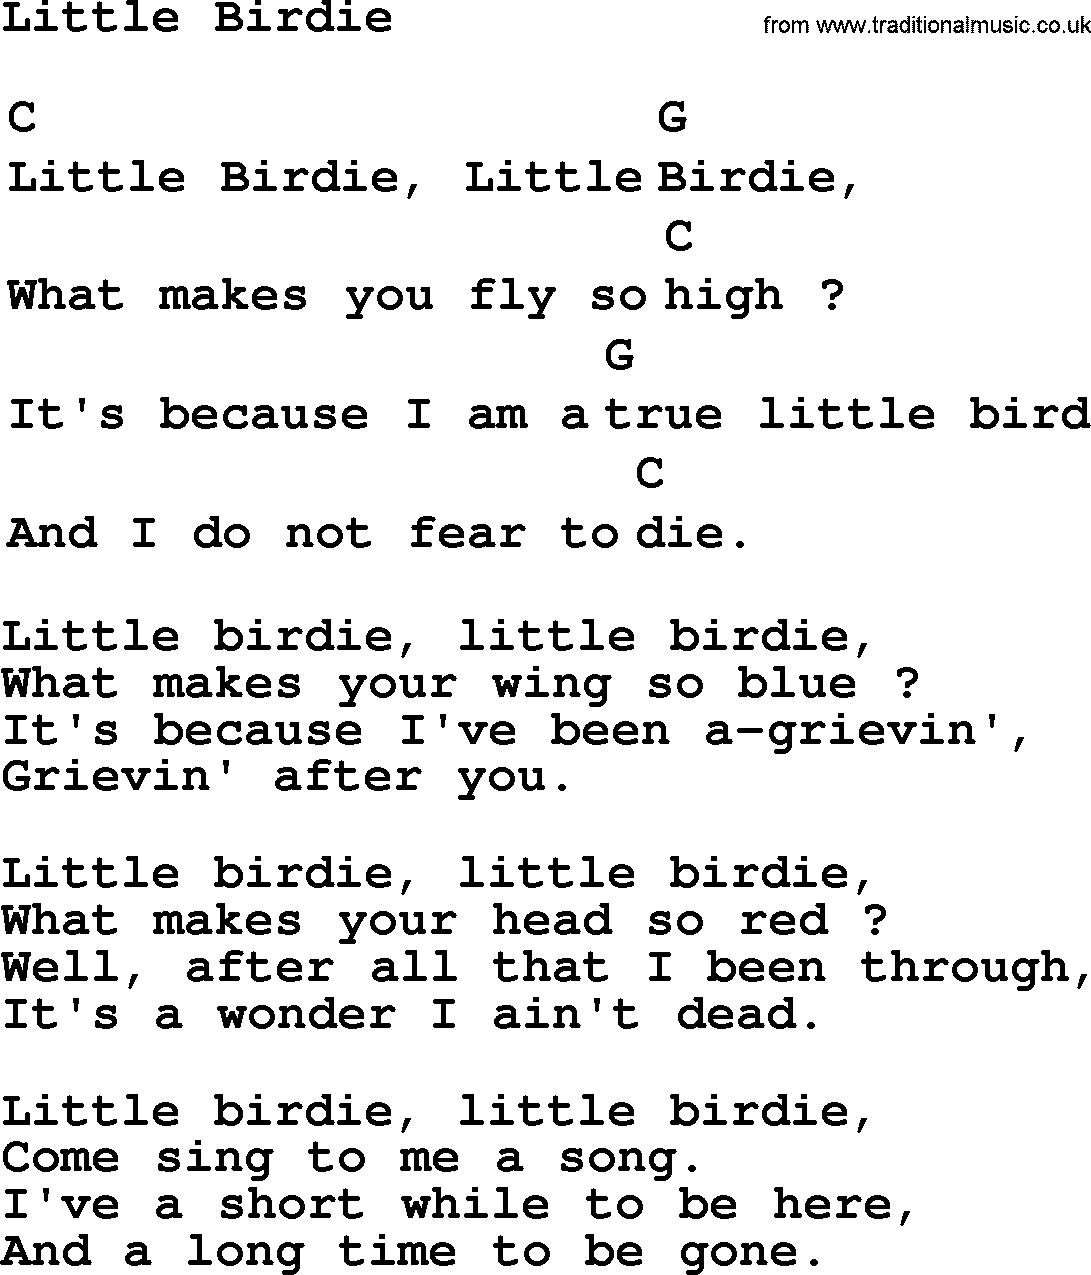 Top 1000 Most Popular Folk and Old-time Songs: Little Birdie, lyrics and chords